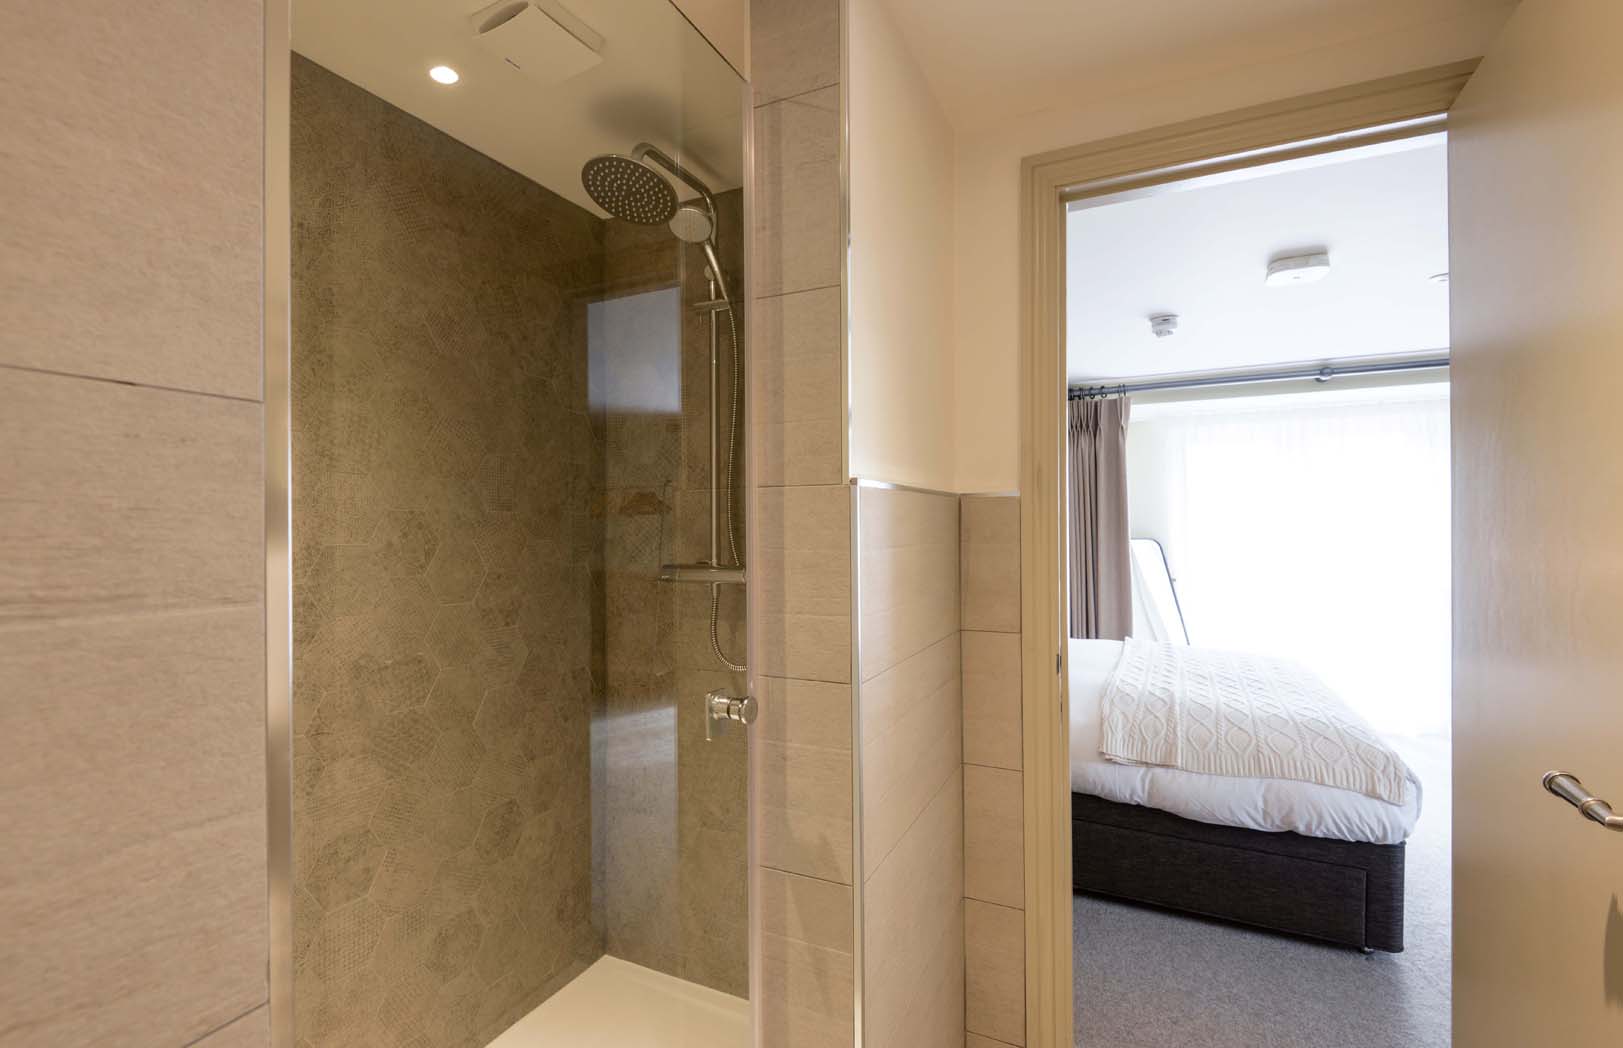 Chew - Bright bathroom with spotlight lighting, and tiled walk-in shower